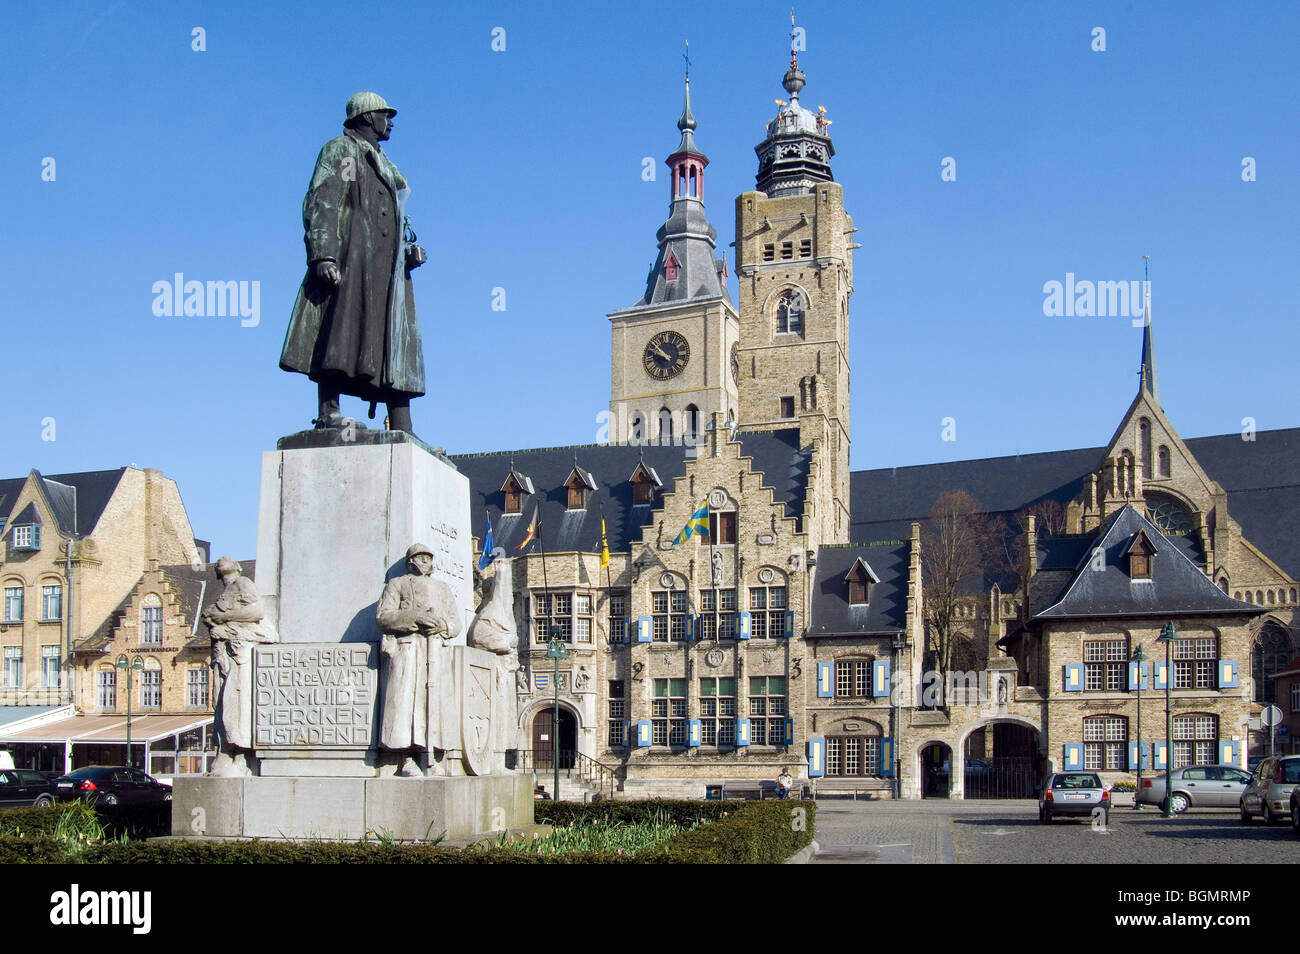 Market square with statue of WW1 General Baron Jacques, town hall, belfry and the Saint Nicholas church, Diksmuide, Belgium Stock Photo